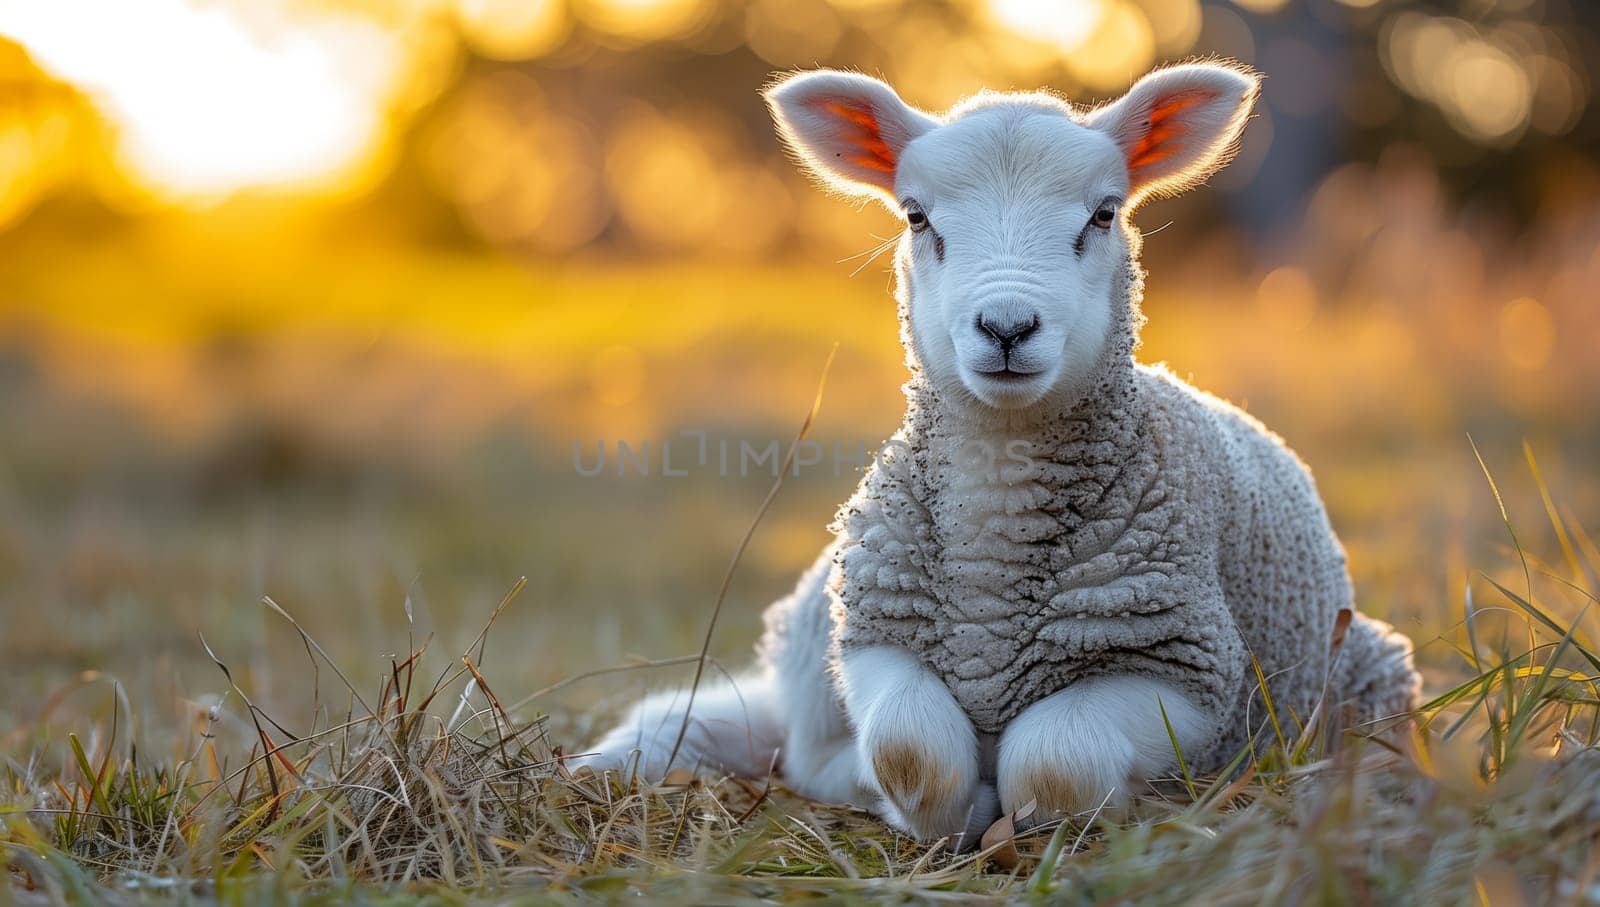 A young lamb is resting in the grass and gazing at the camera, surrounded by a natural landscape. The terrestrial animal has soft fur and a curious expression